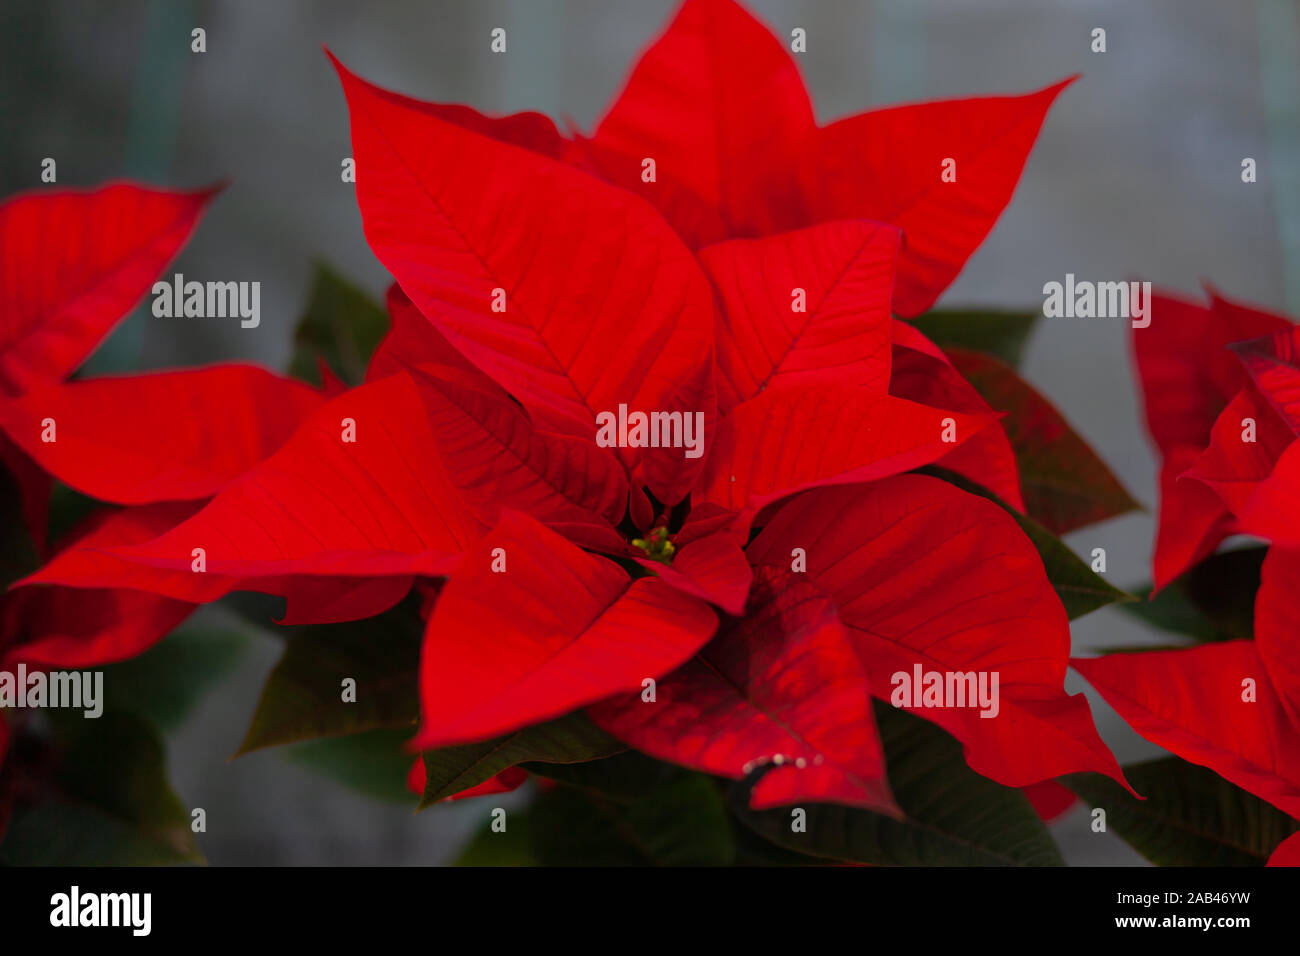 Red poinsettia flower, also known as the Christmas star or Bartholomew star. New year winter holiday xmas. Stock Photo